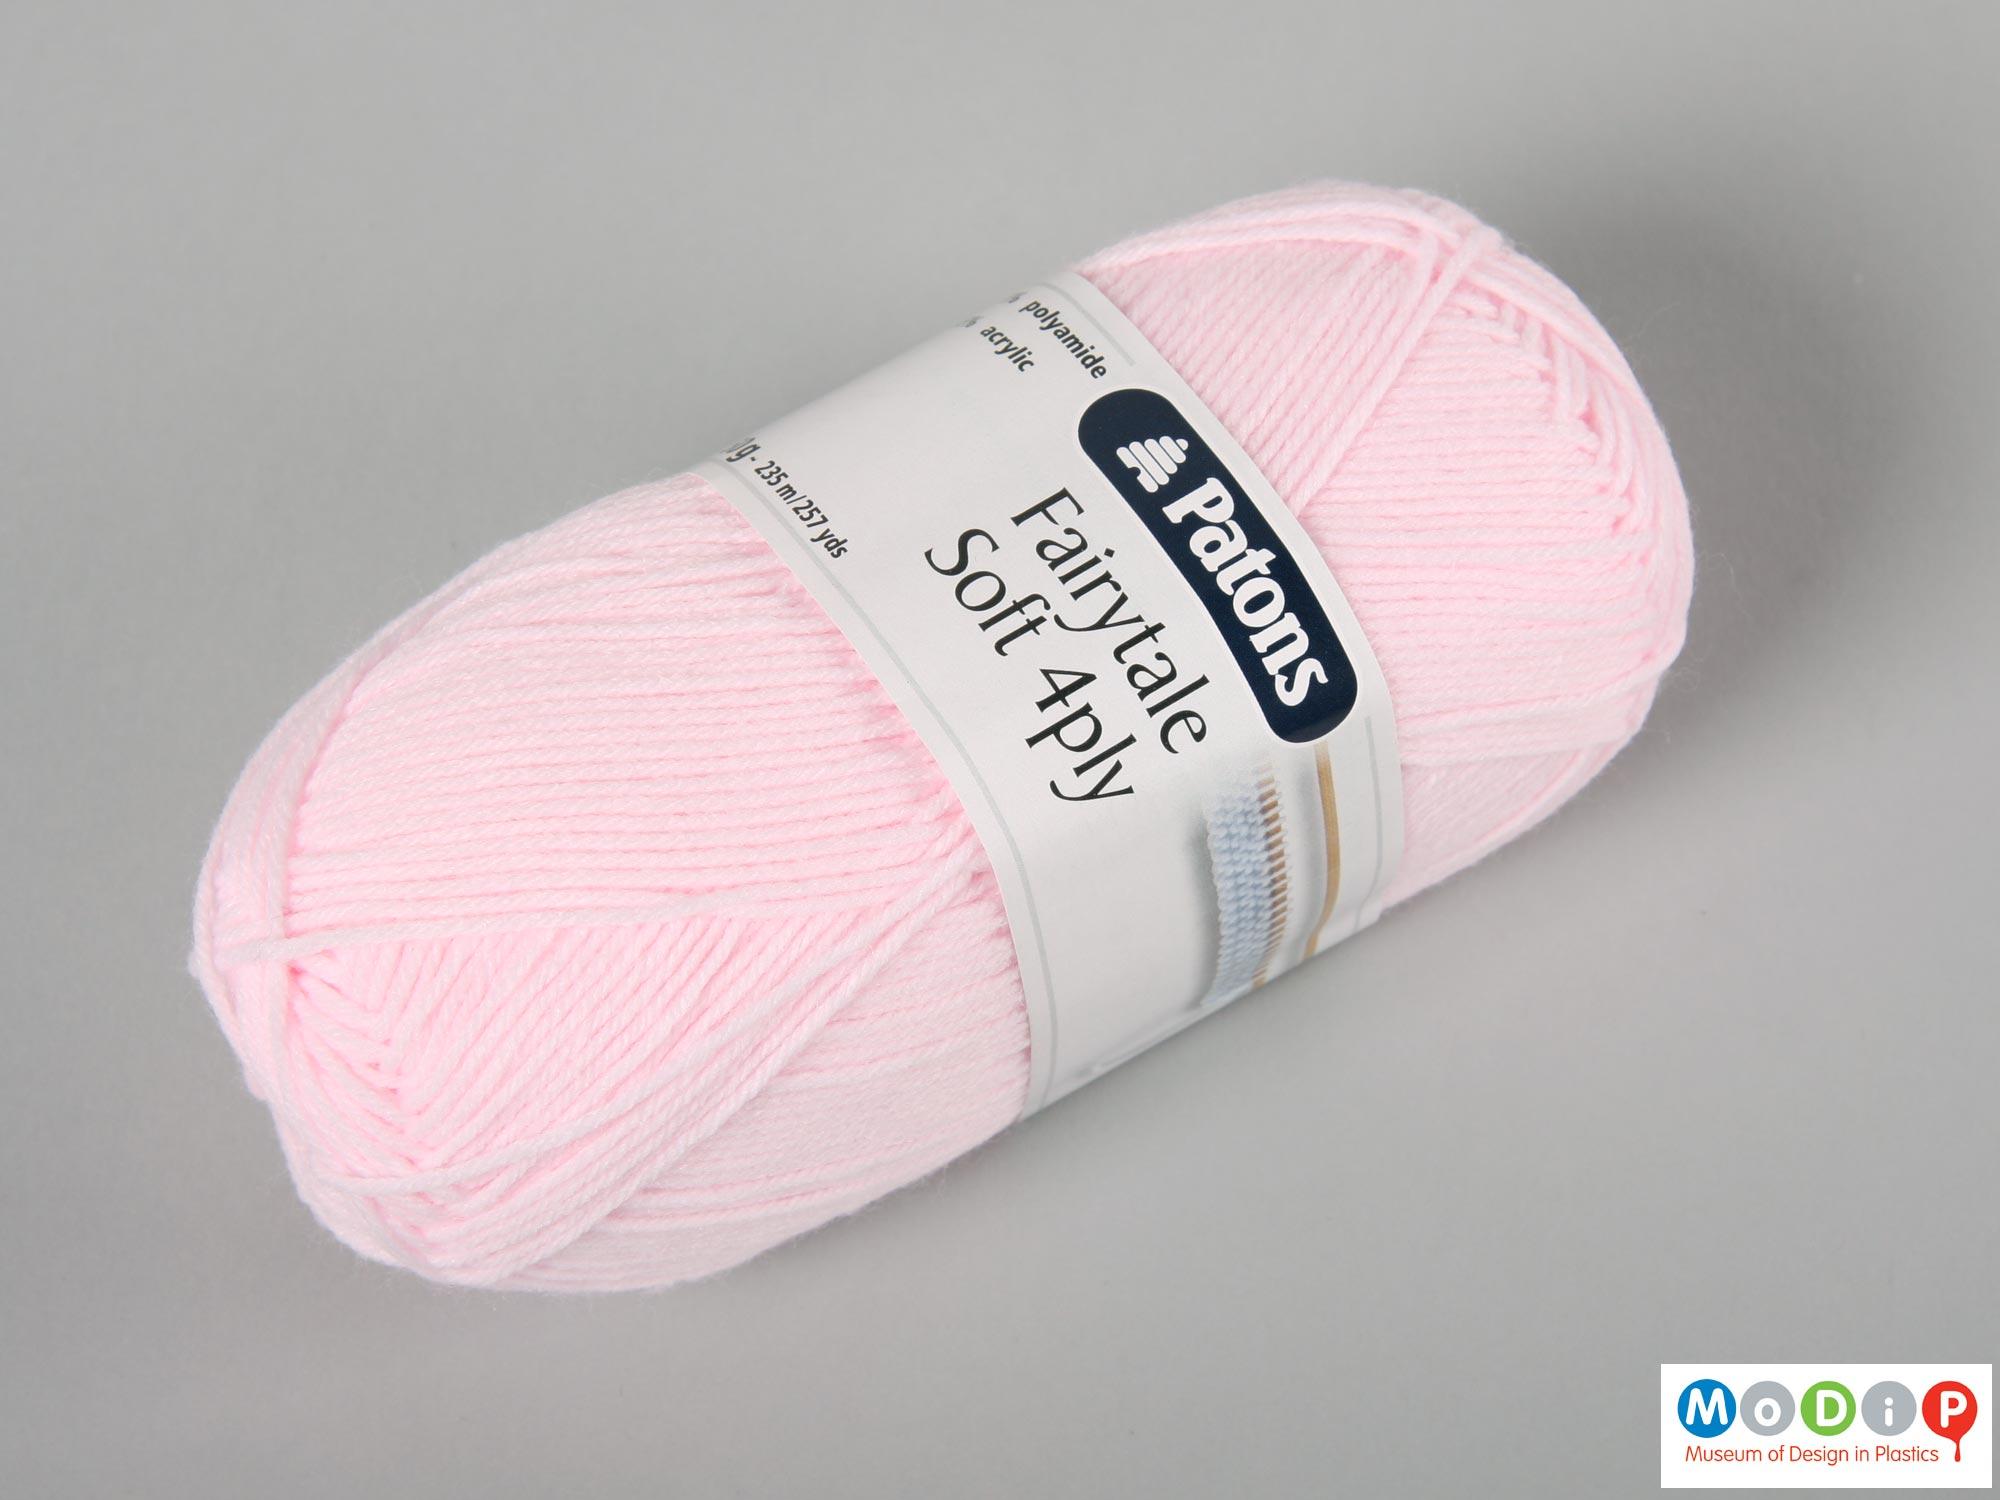 Patons Fairytale Soft 4ply | Museum of Design in Plastics